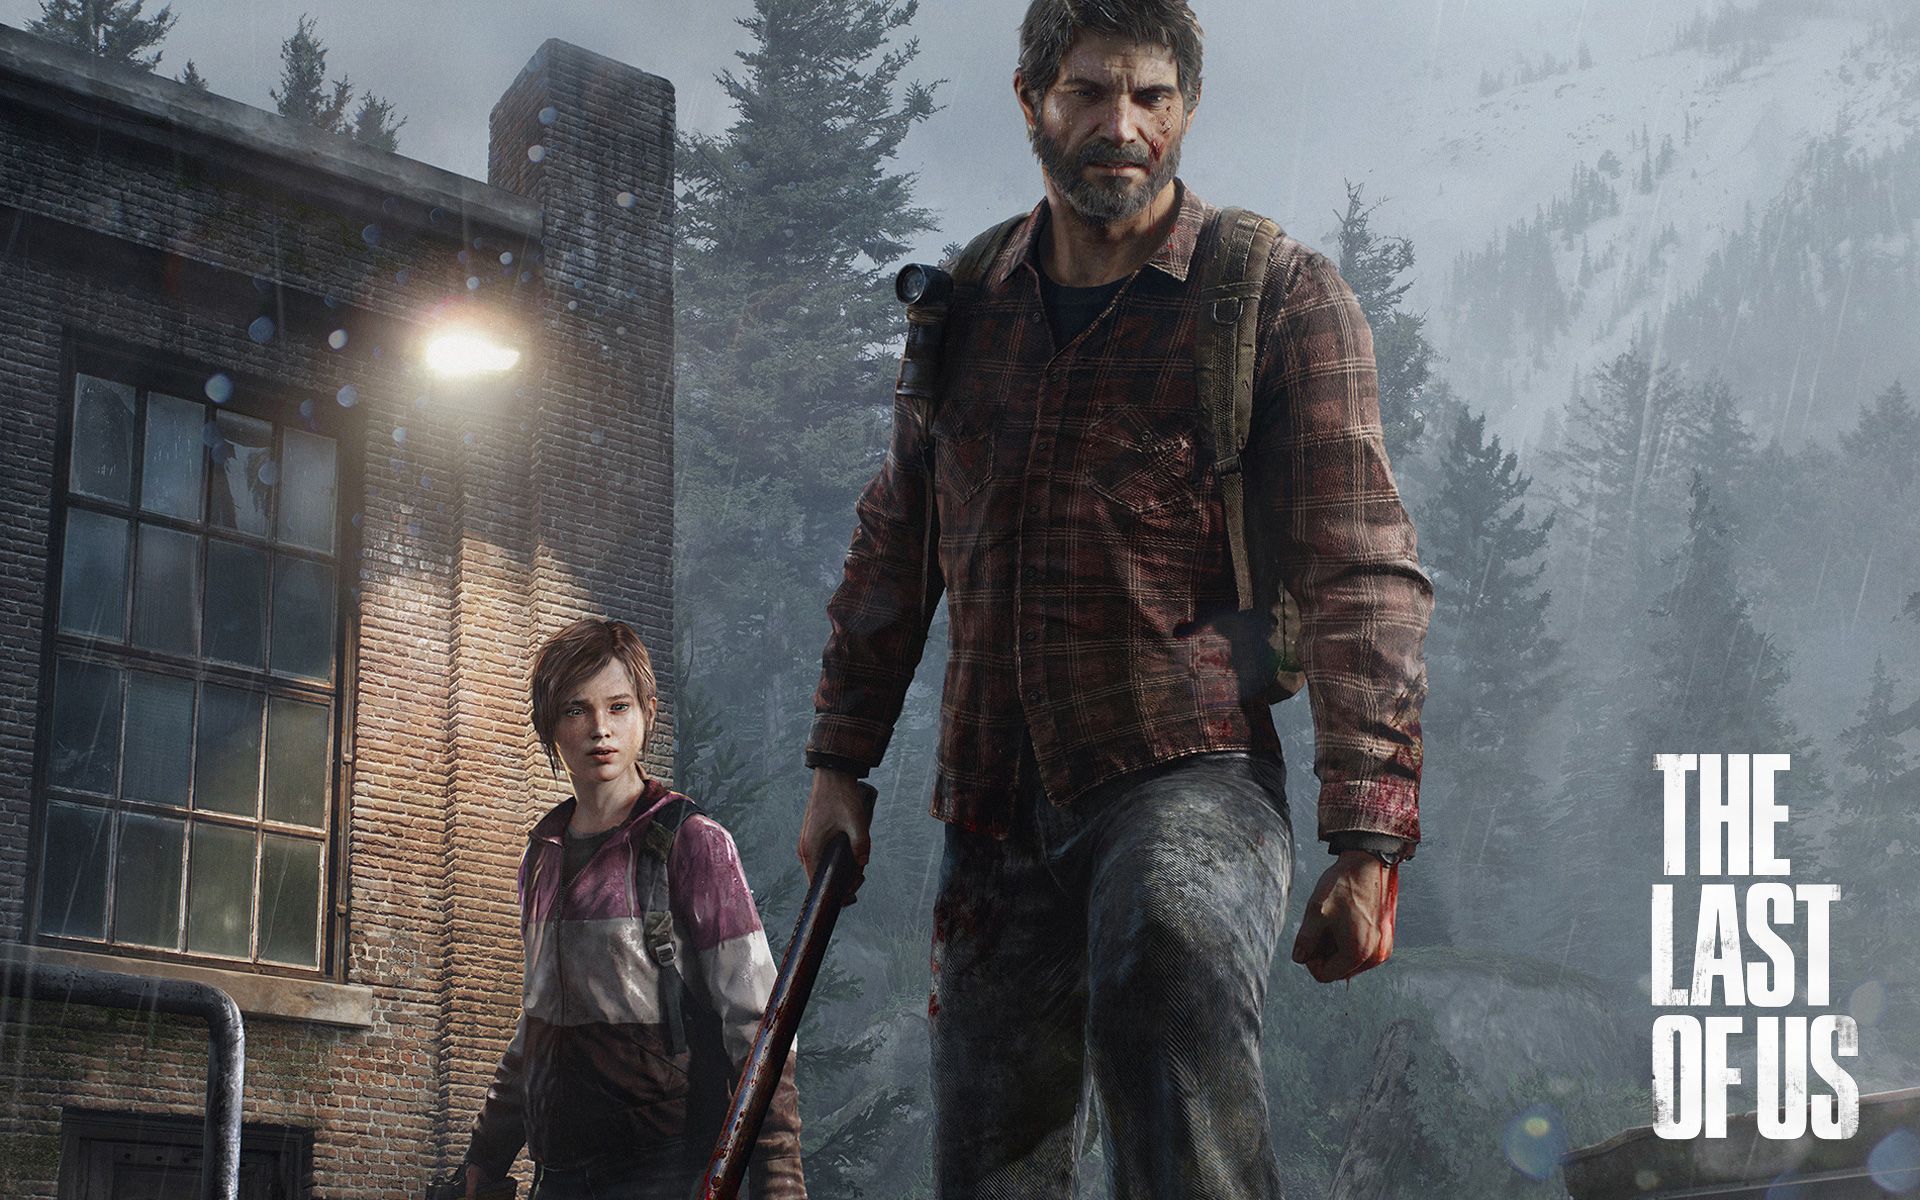 Free The Last of Us Wallpaper in 1920x1200. The last of us, Joel and ellie, HD wallpaper